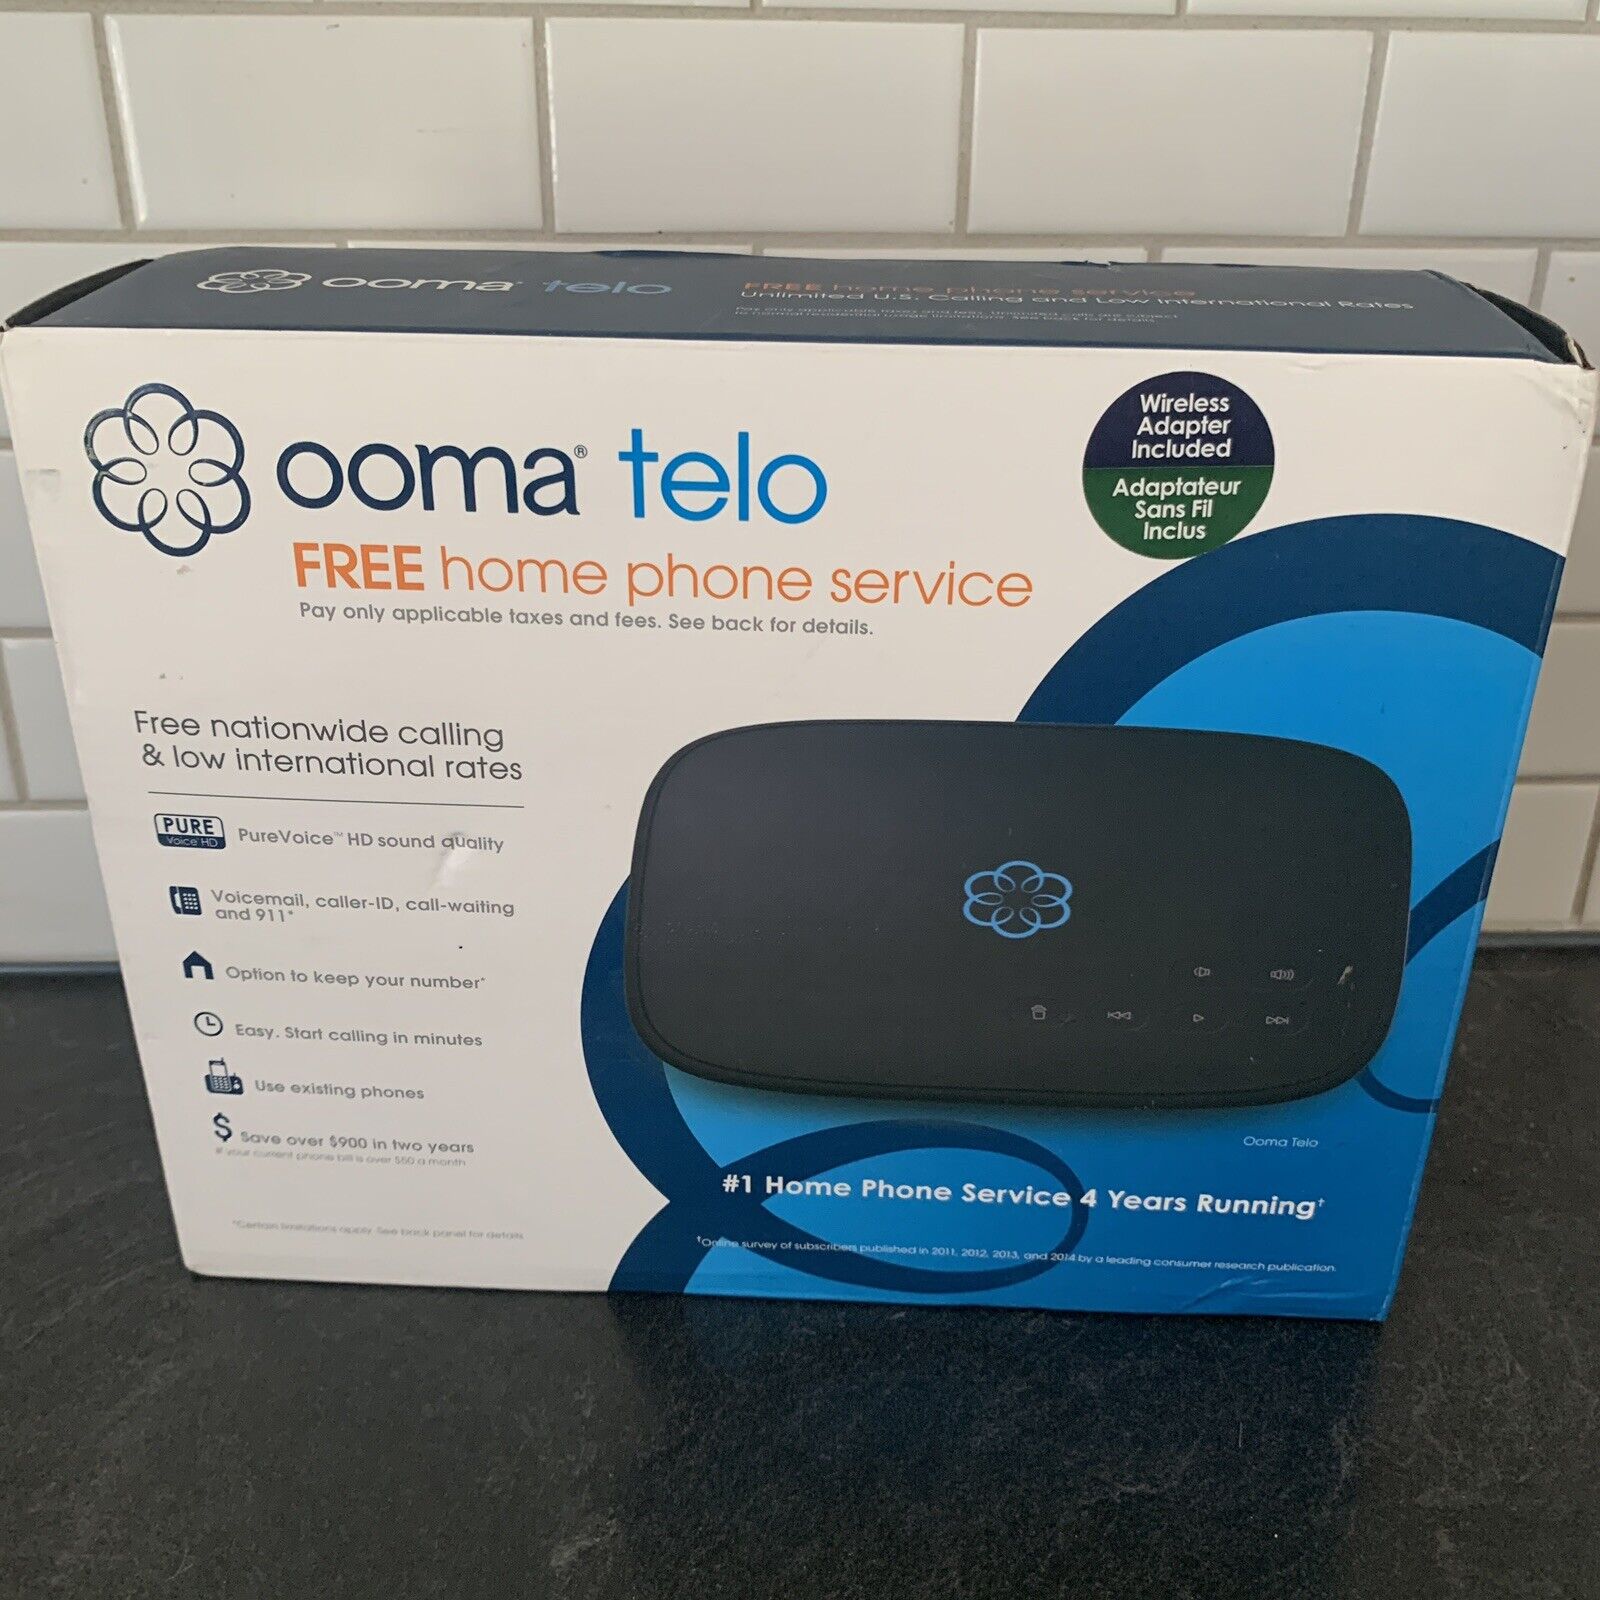 Ooma Telo Free Home Phone Service VoIP Phone - Black - Ethernet & Power Cord